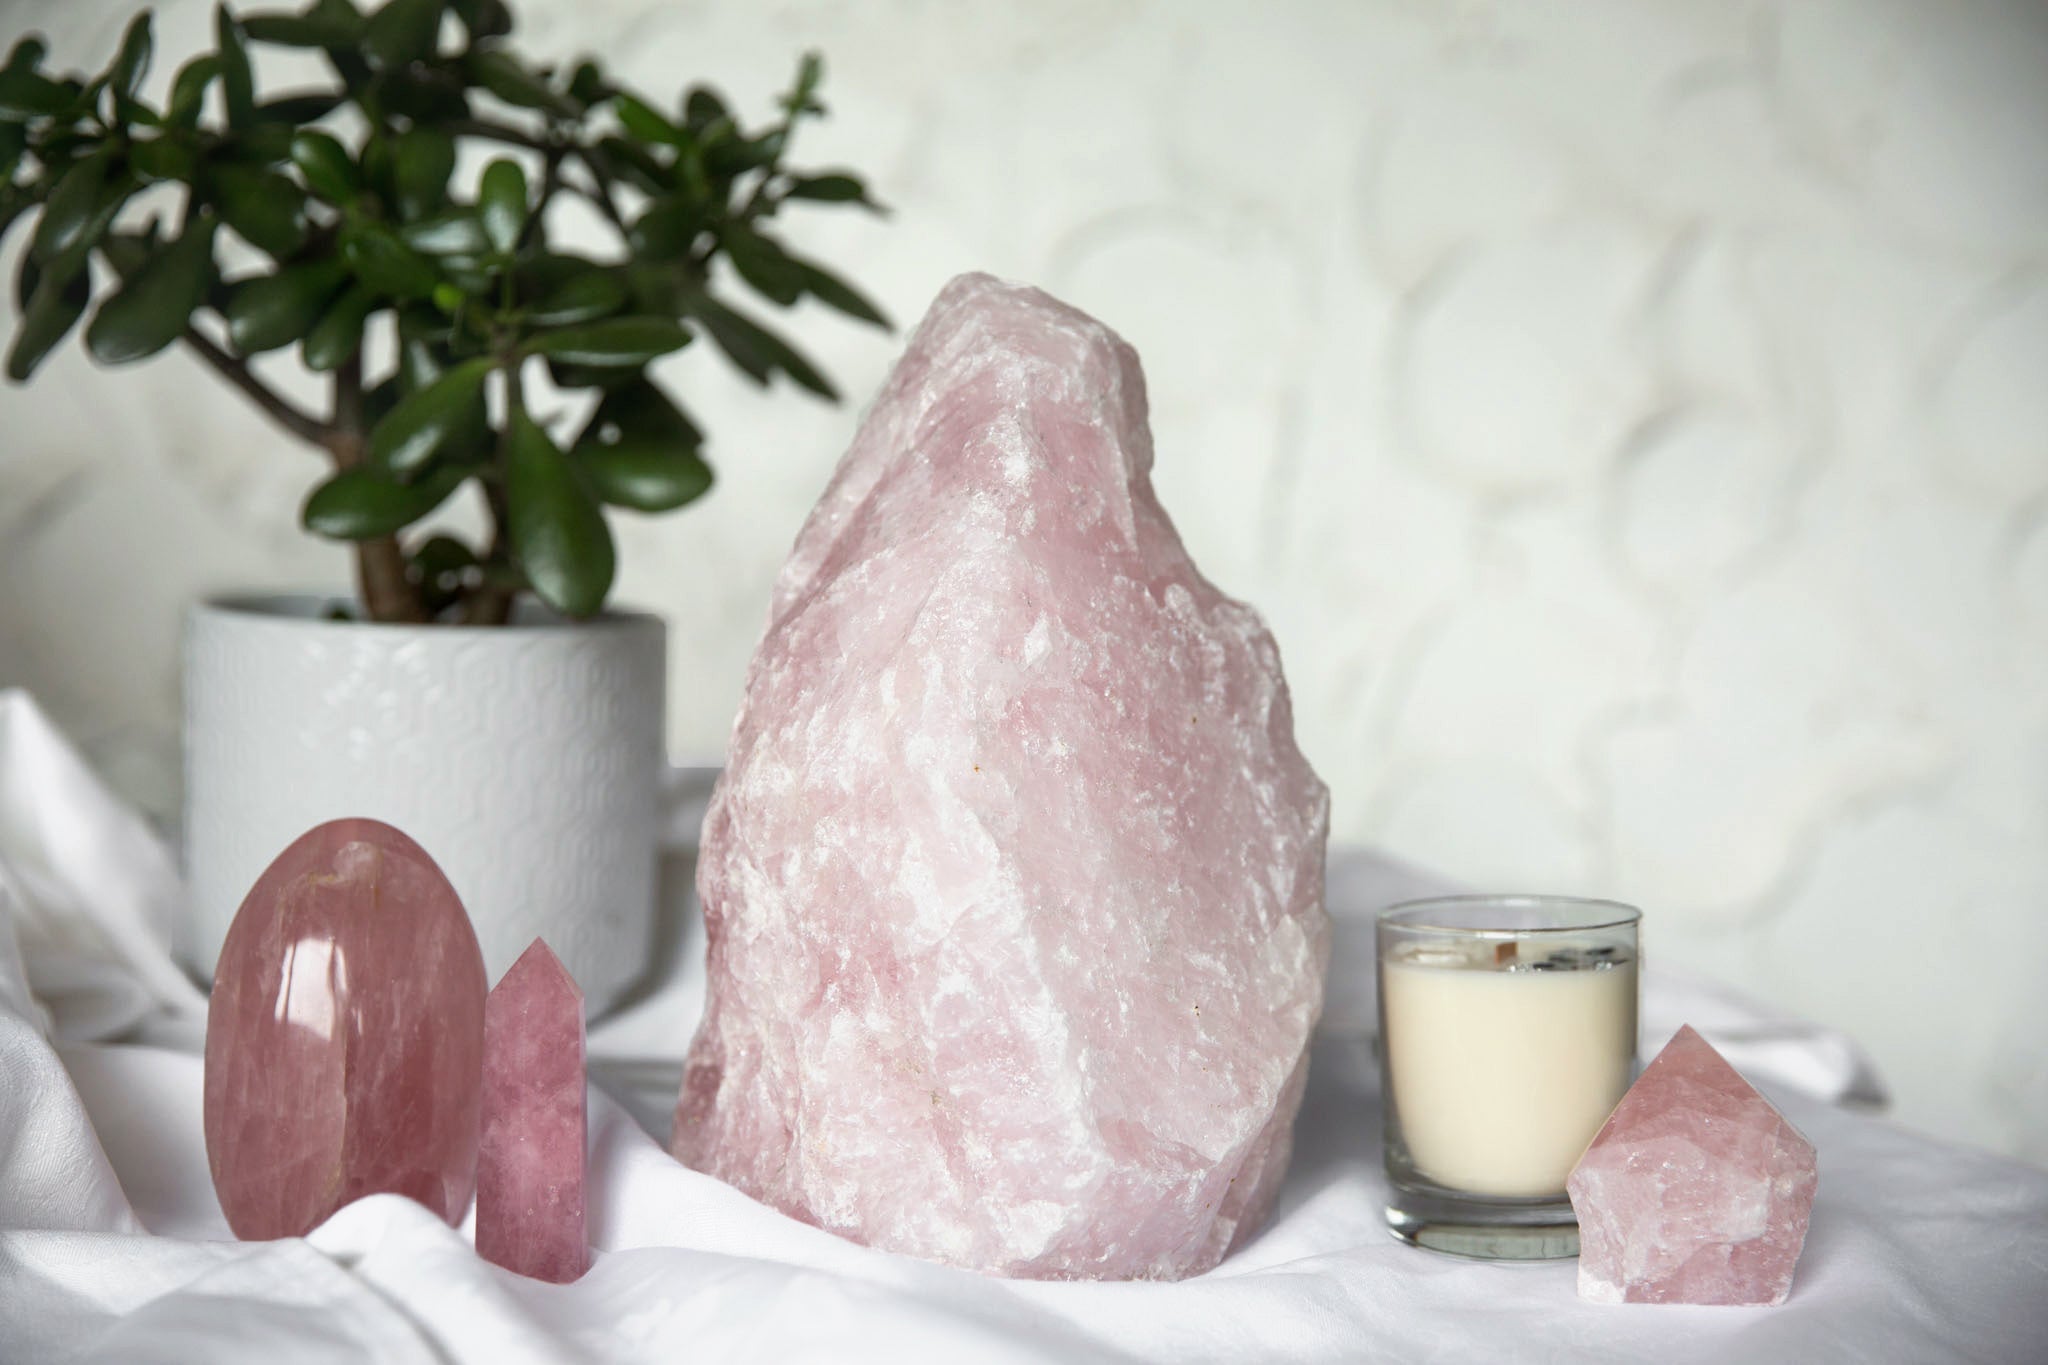 Rose Quartz XL Cut Base Rough - Premium Crystals + Gifts from Clarity Co. - NZ's Favourite Online Crystal Shop